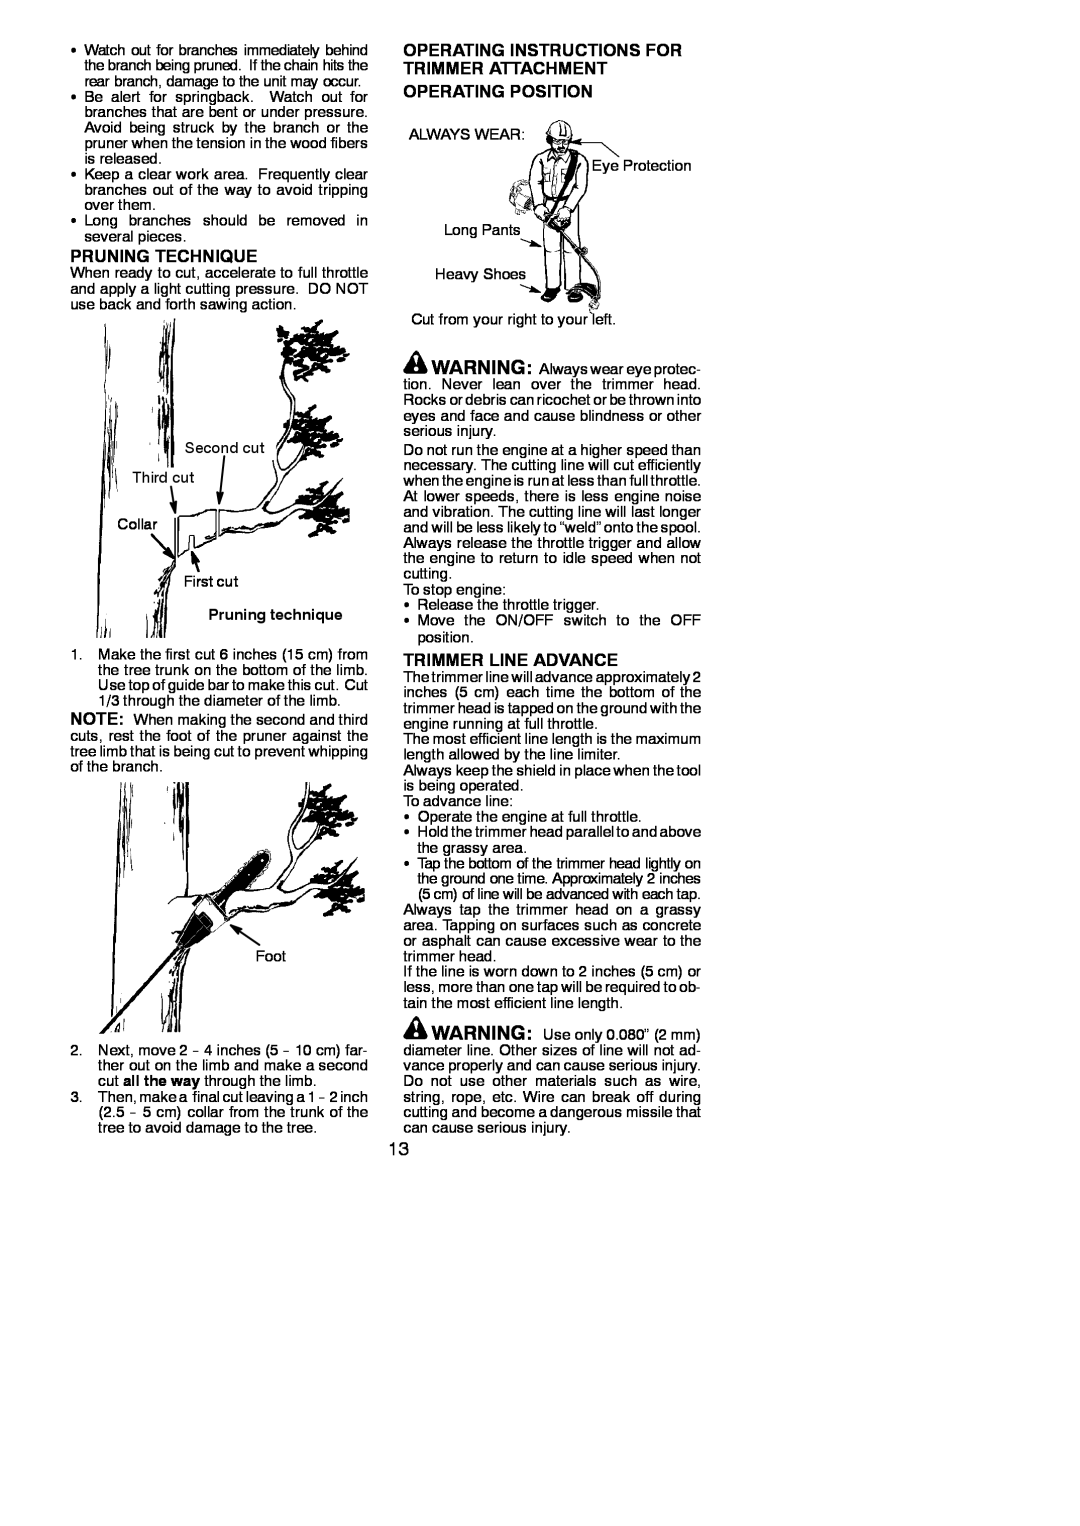 Poulan 530165221 Pruning Technique, Operating Instructions For Trimmer Attachment Operating Position, Trimmer Line Advance 